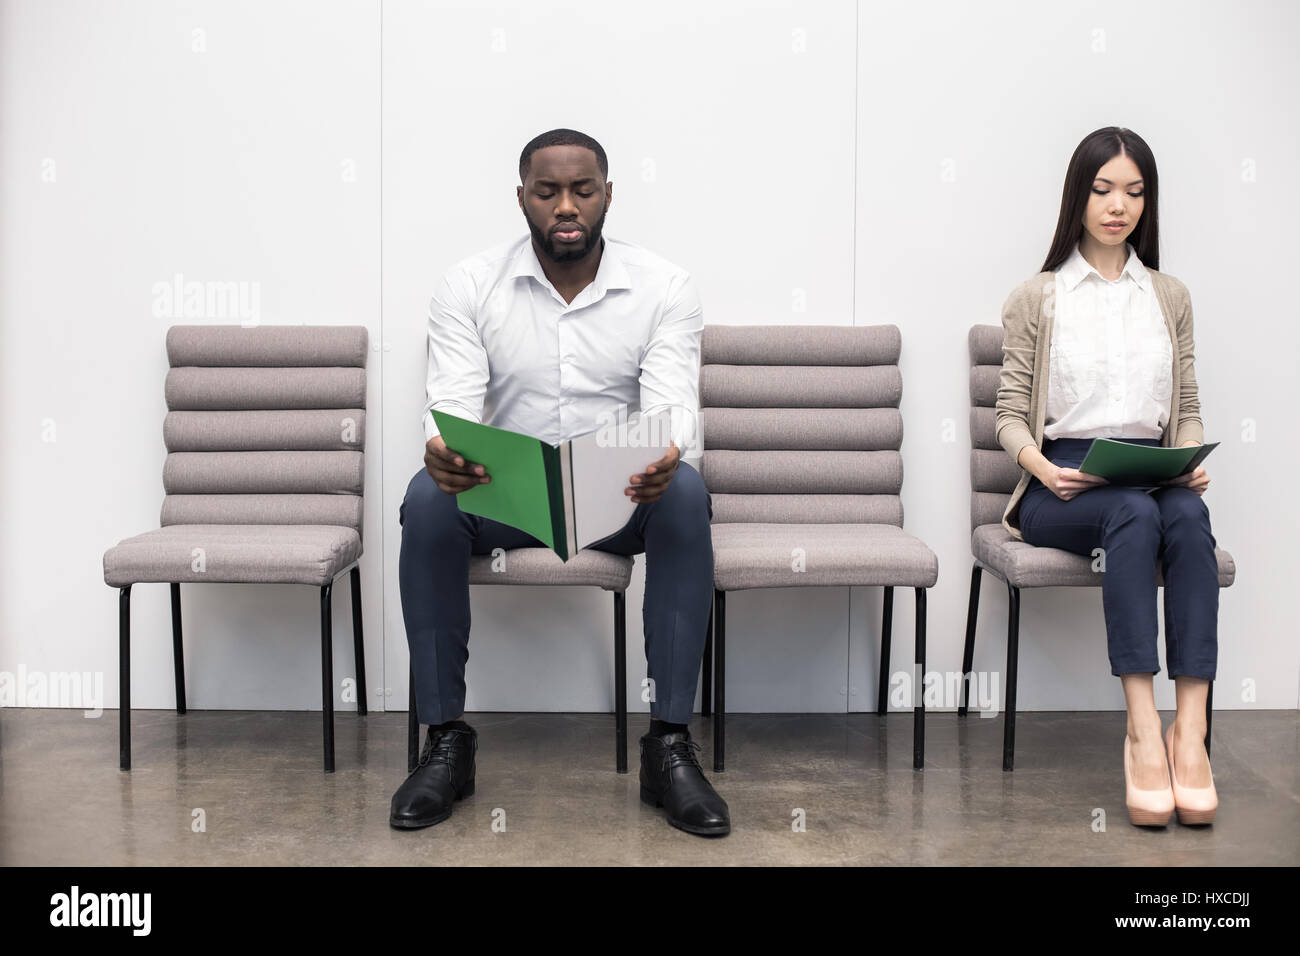 People Waiting for Job Interview Concept Stock Photo